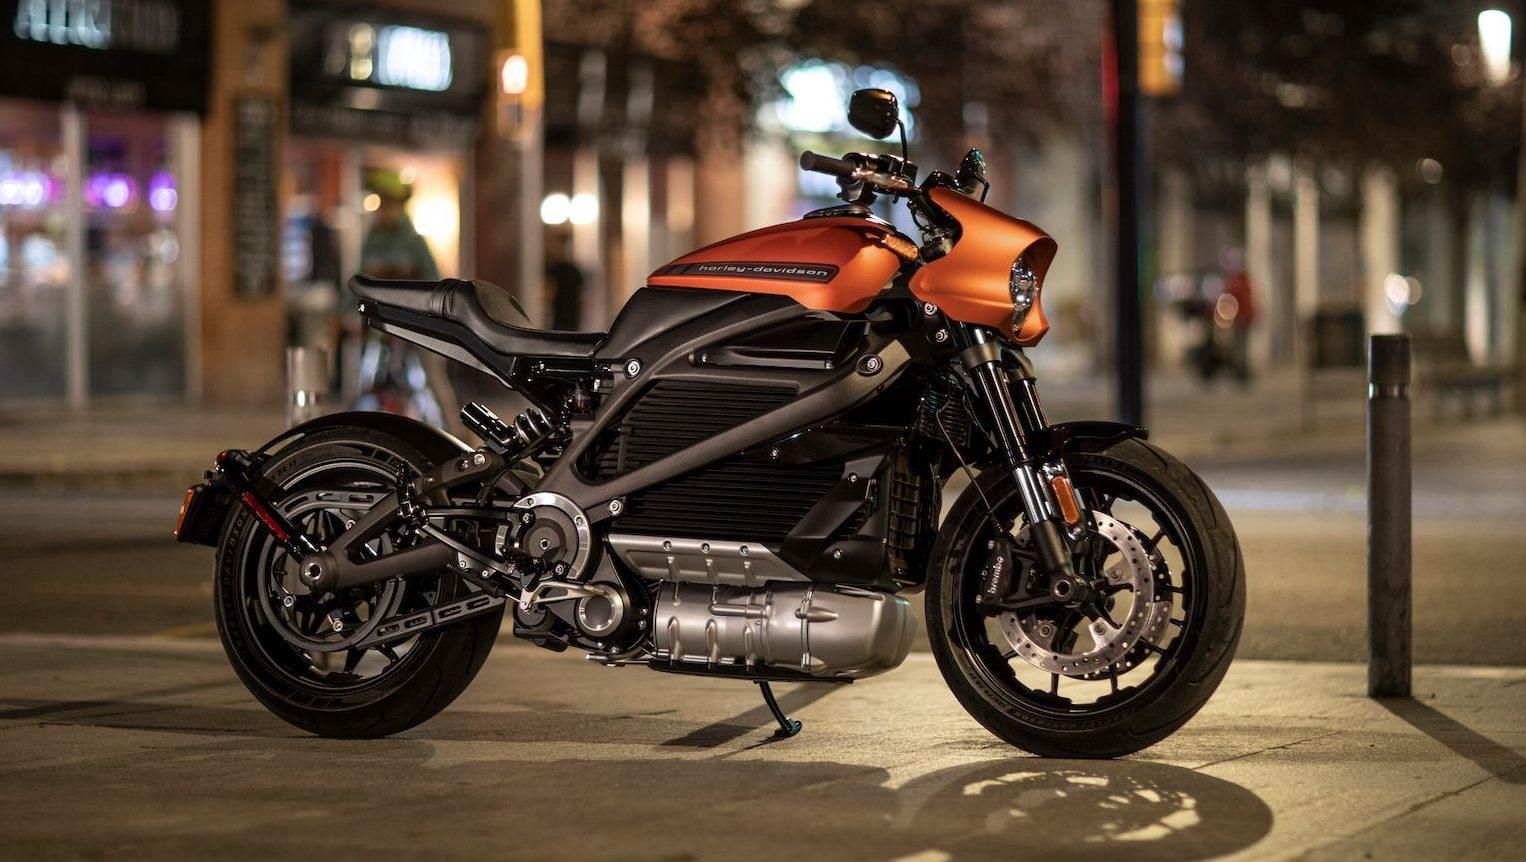 An Image Of The Harley-Davidson Livewire